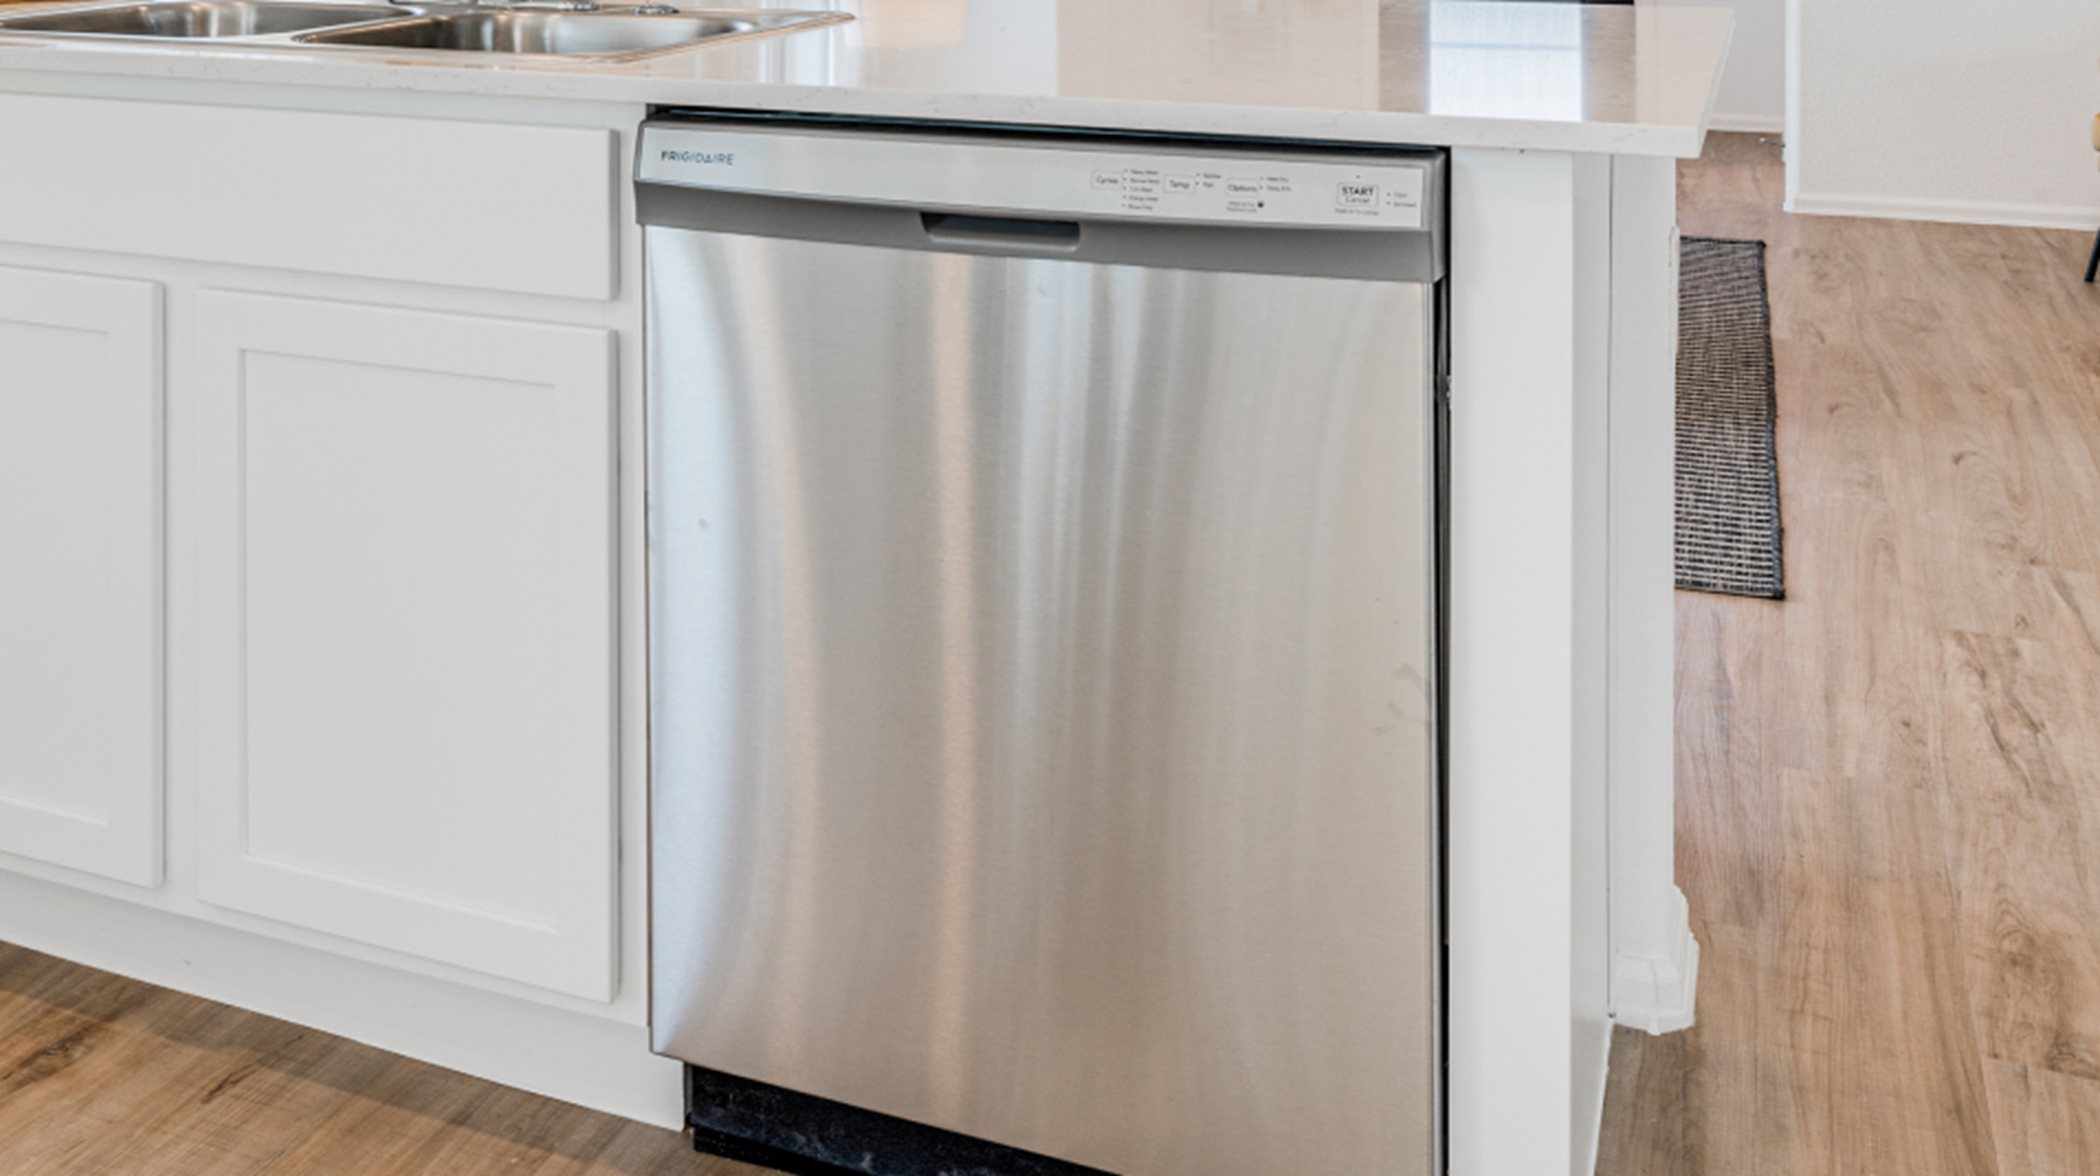 A brand-new stainless steel dishwasher helps make clean-ups simple 